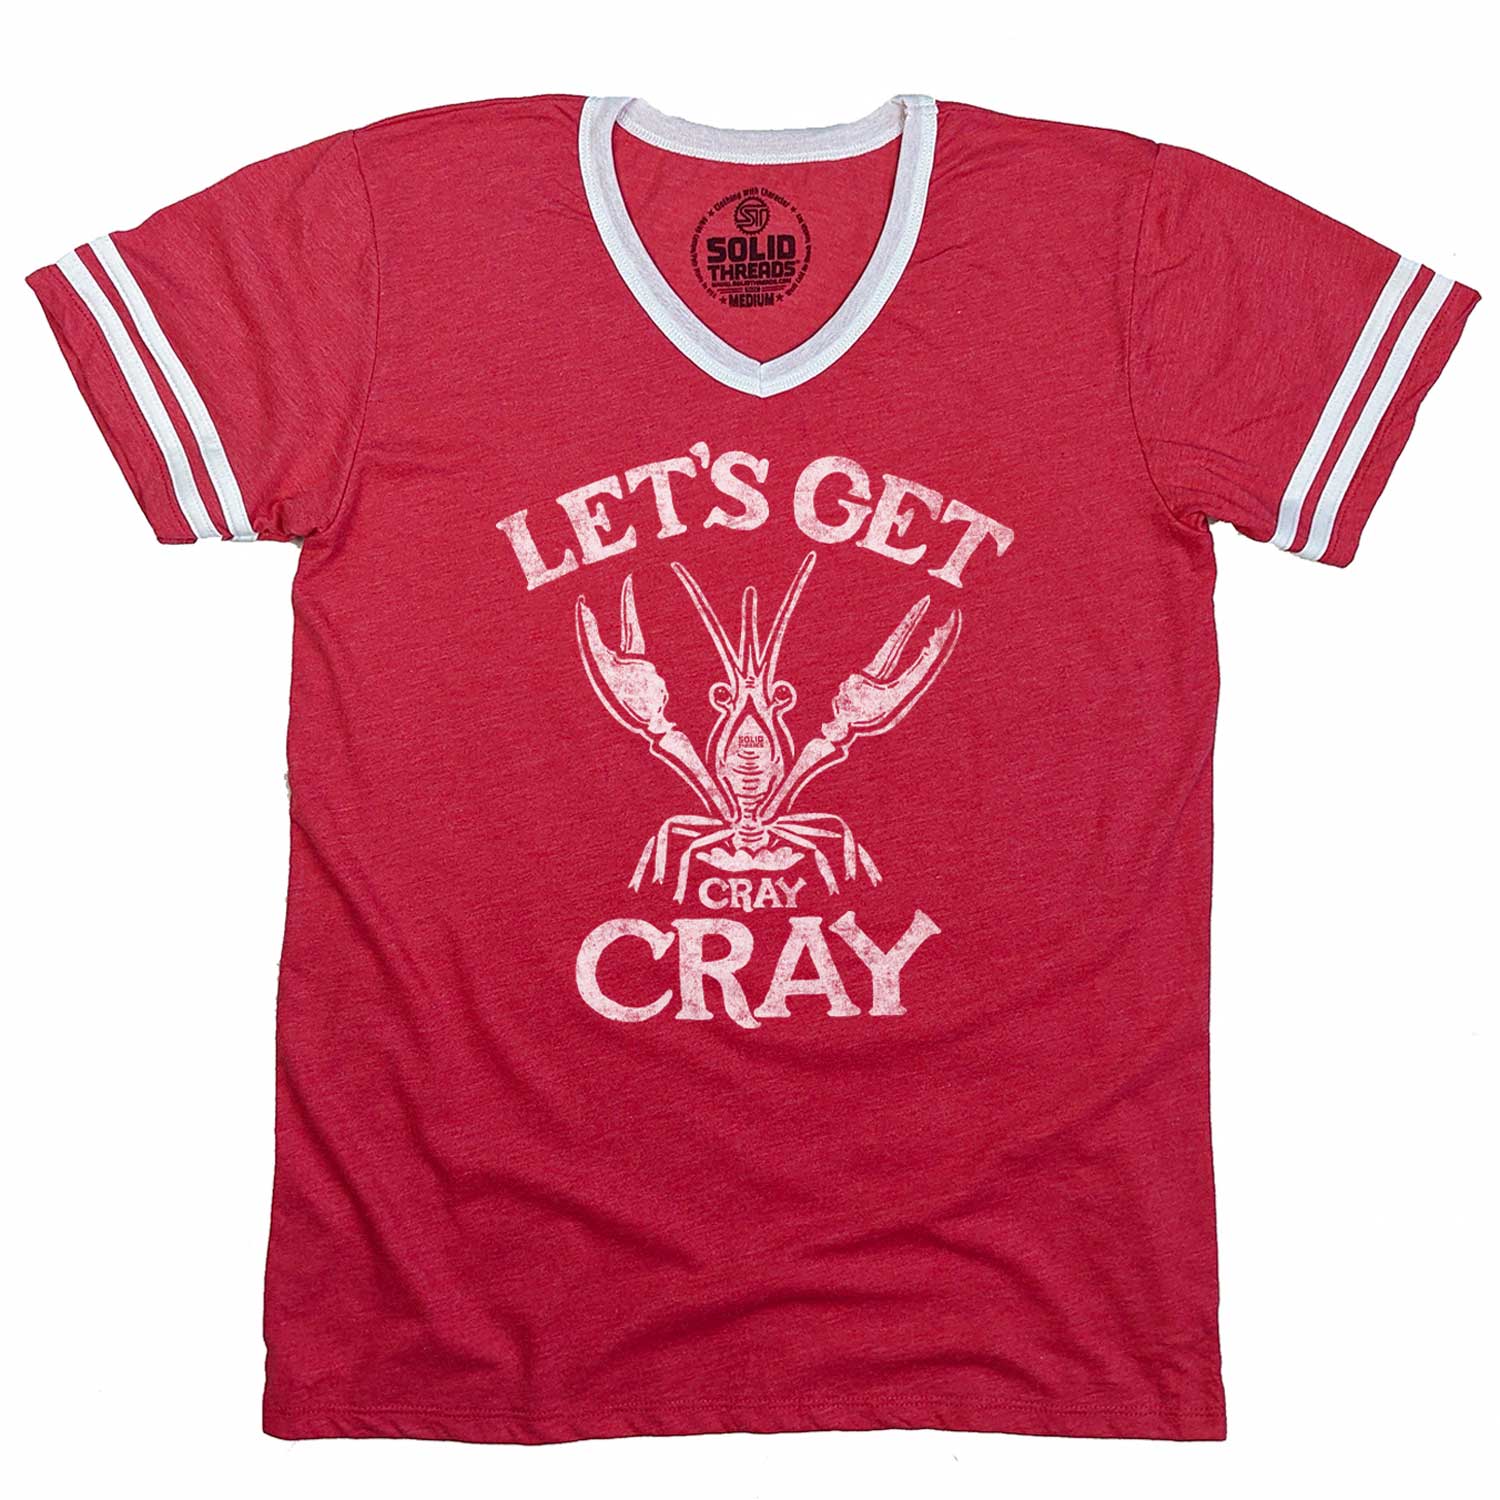 Men's Let's Get Cray Cray Vintage Graphic V-Neck Tee | Funny Crawfish T-shirt | Solid Threads